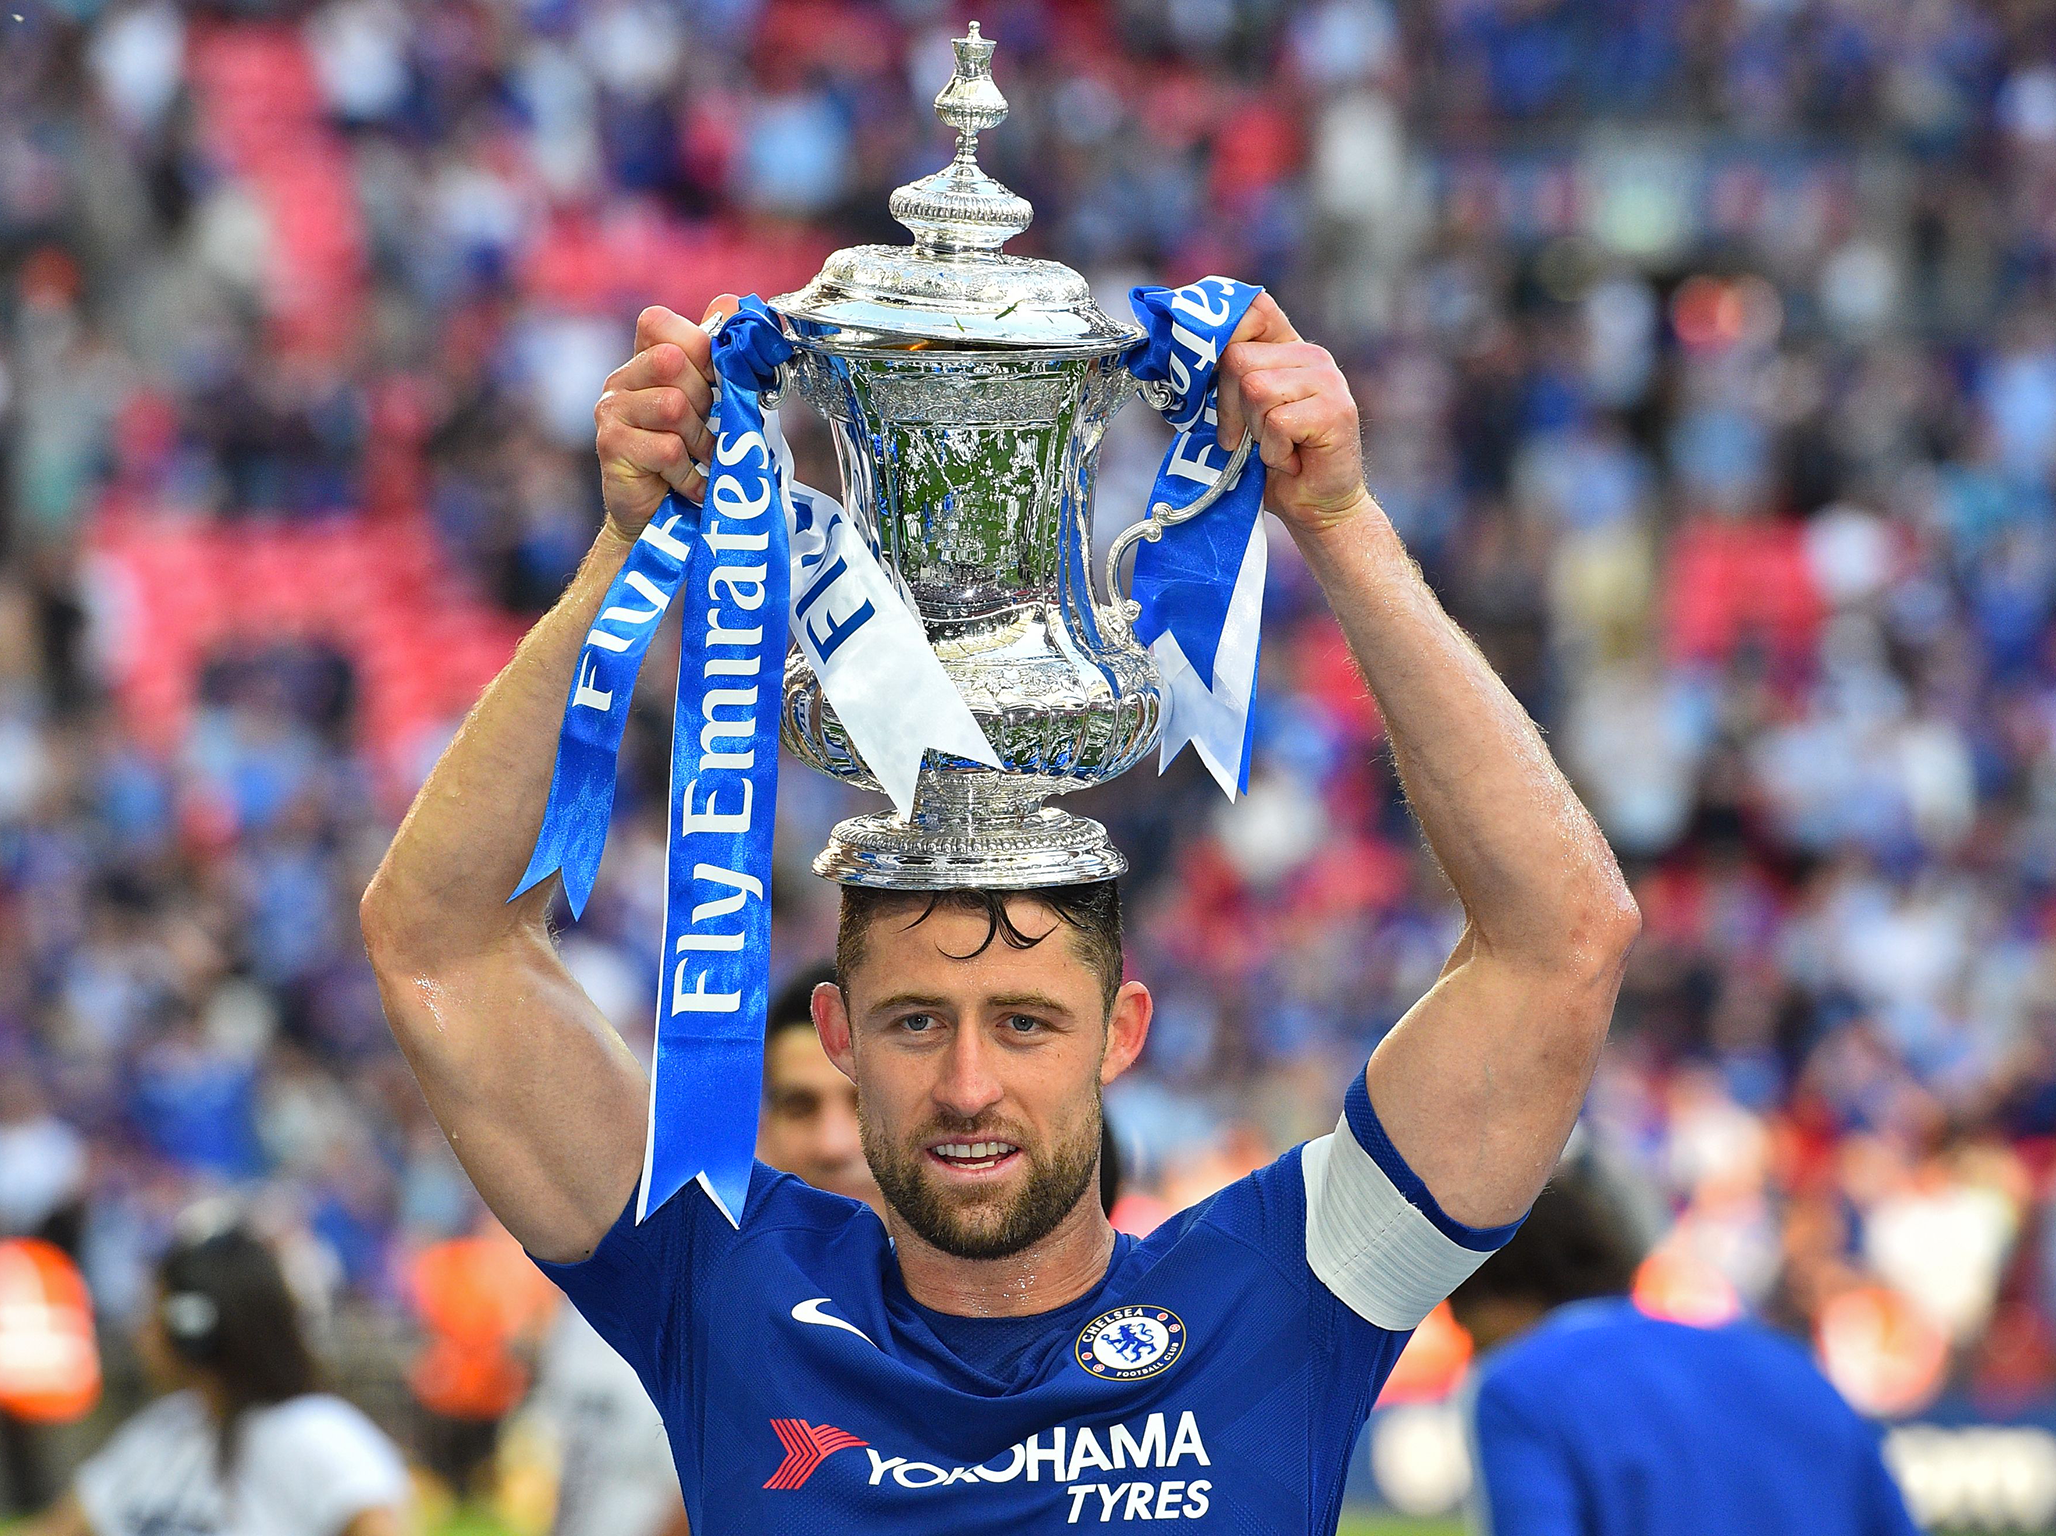 Gary Cahill celebrating at Wembley with the FA Cup